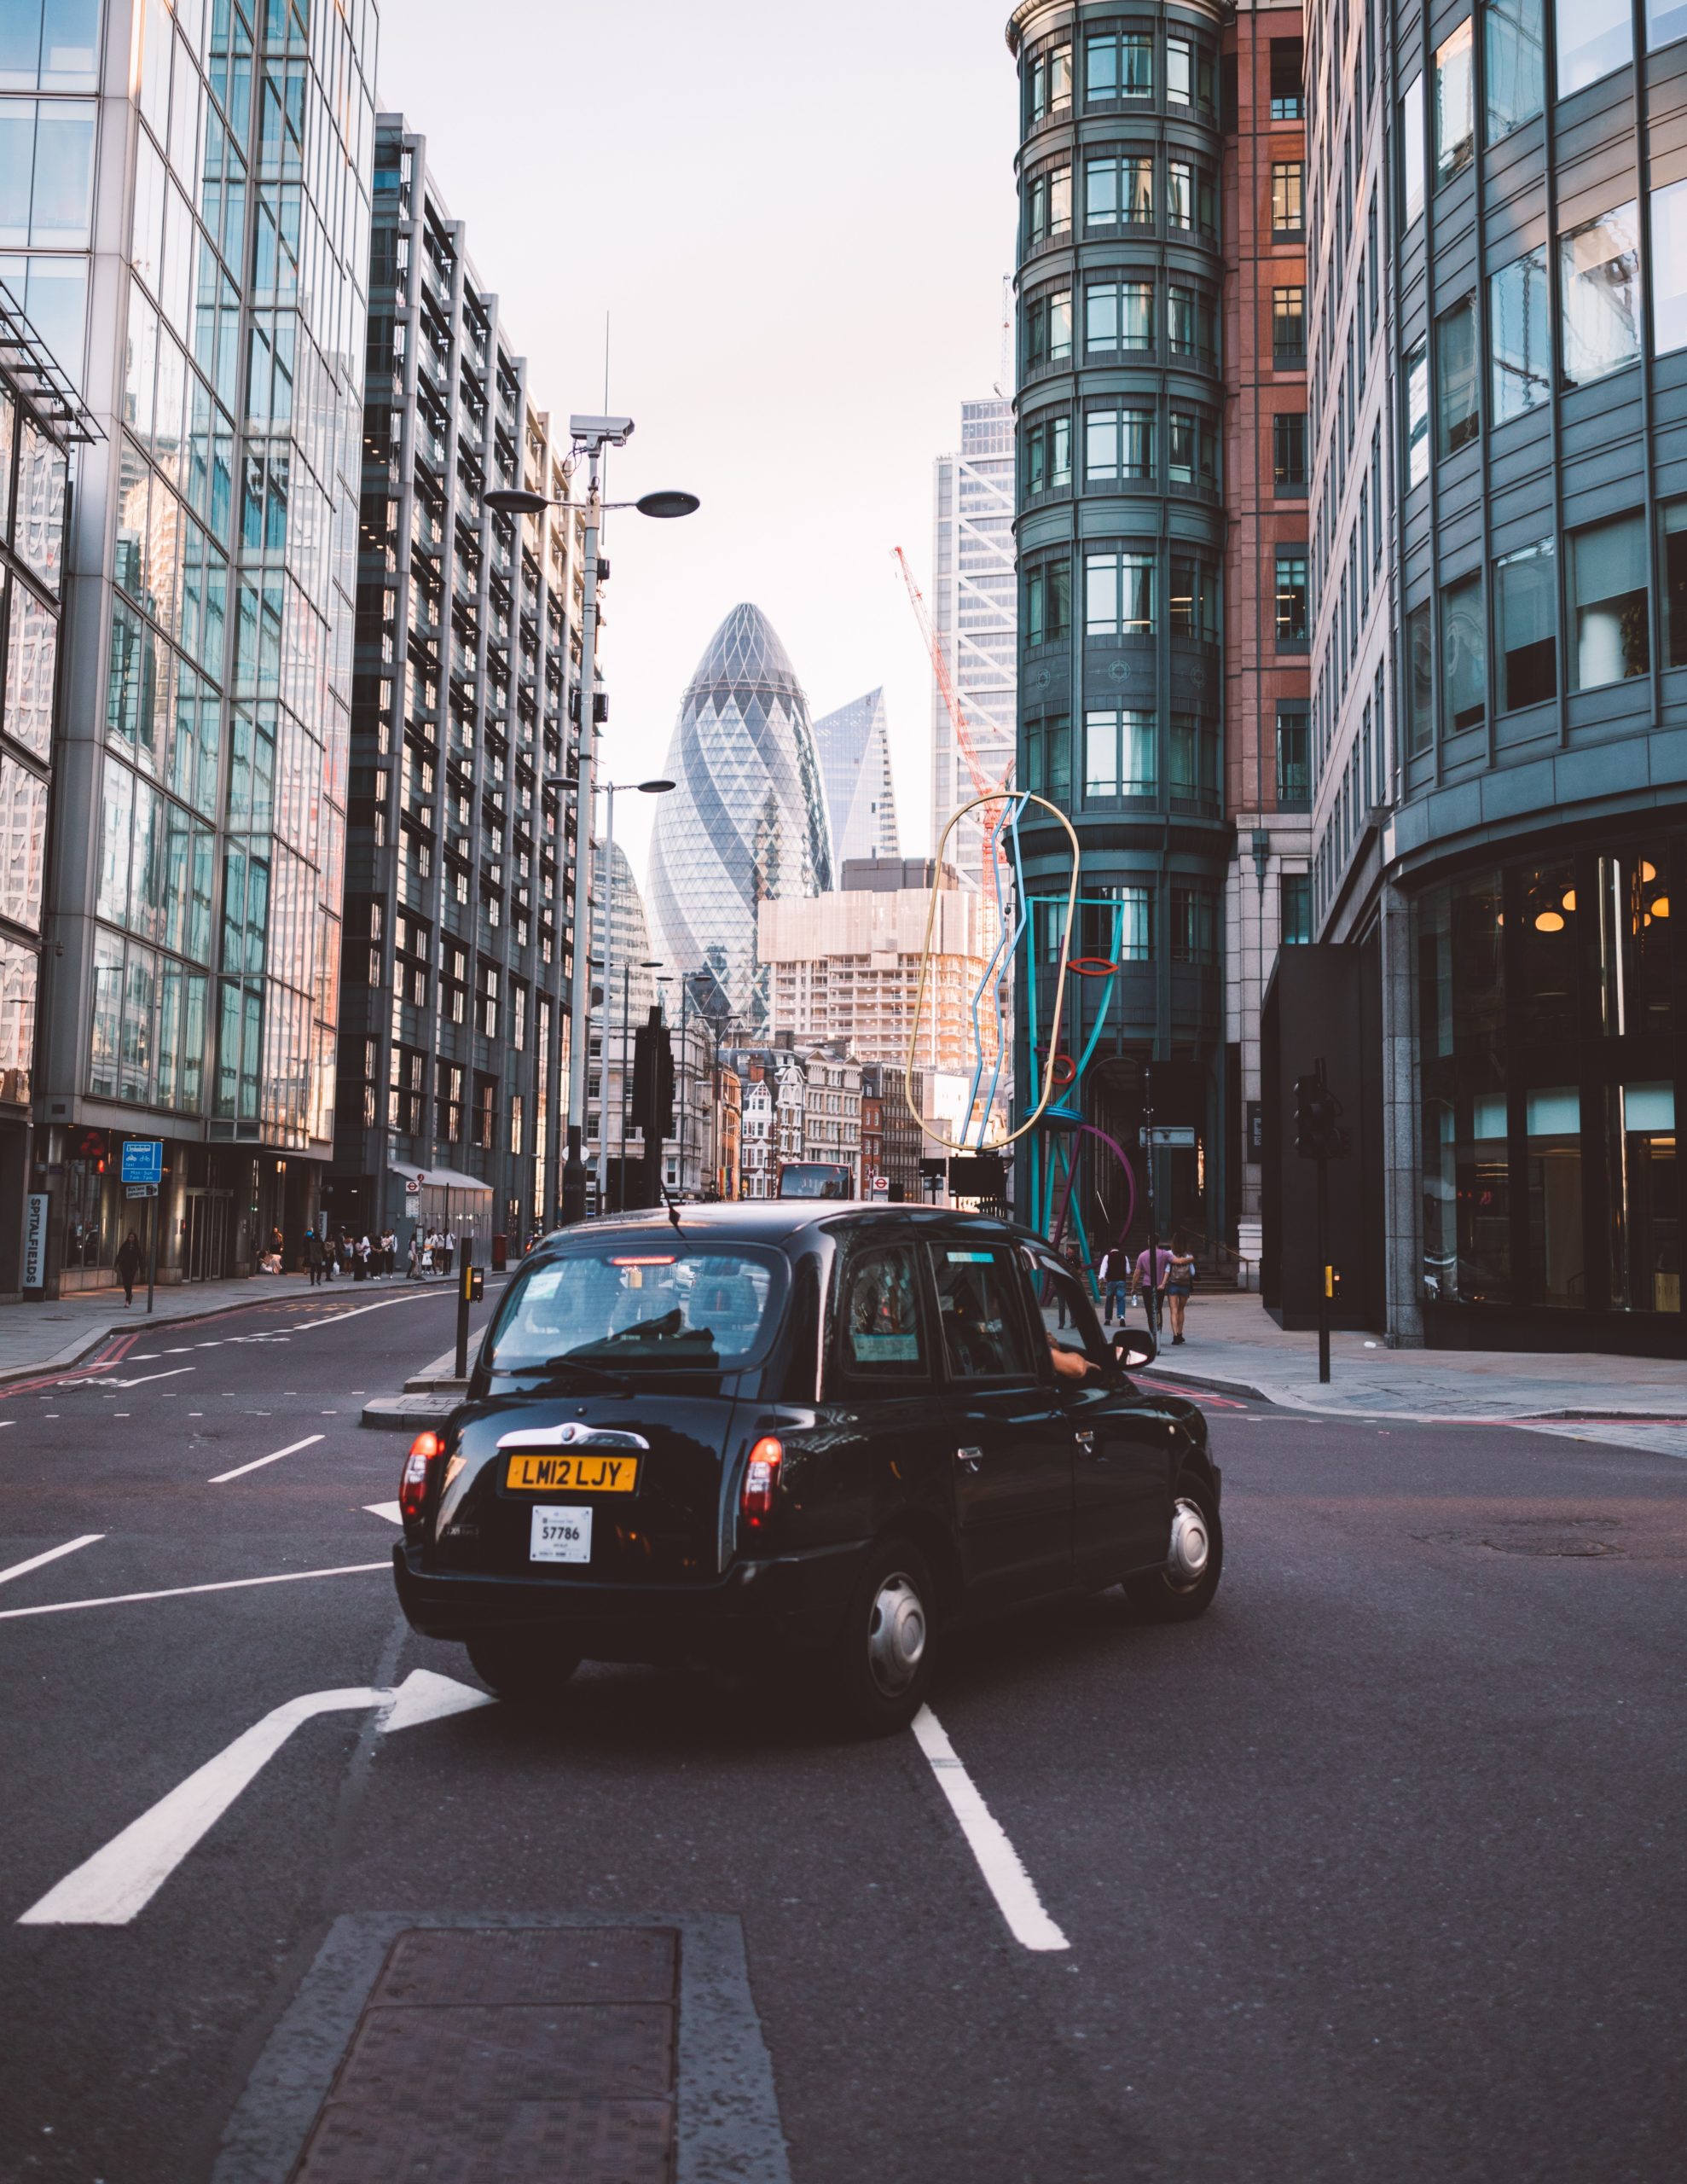 London black cab with the gherkin in the background